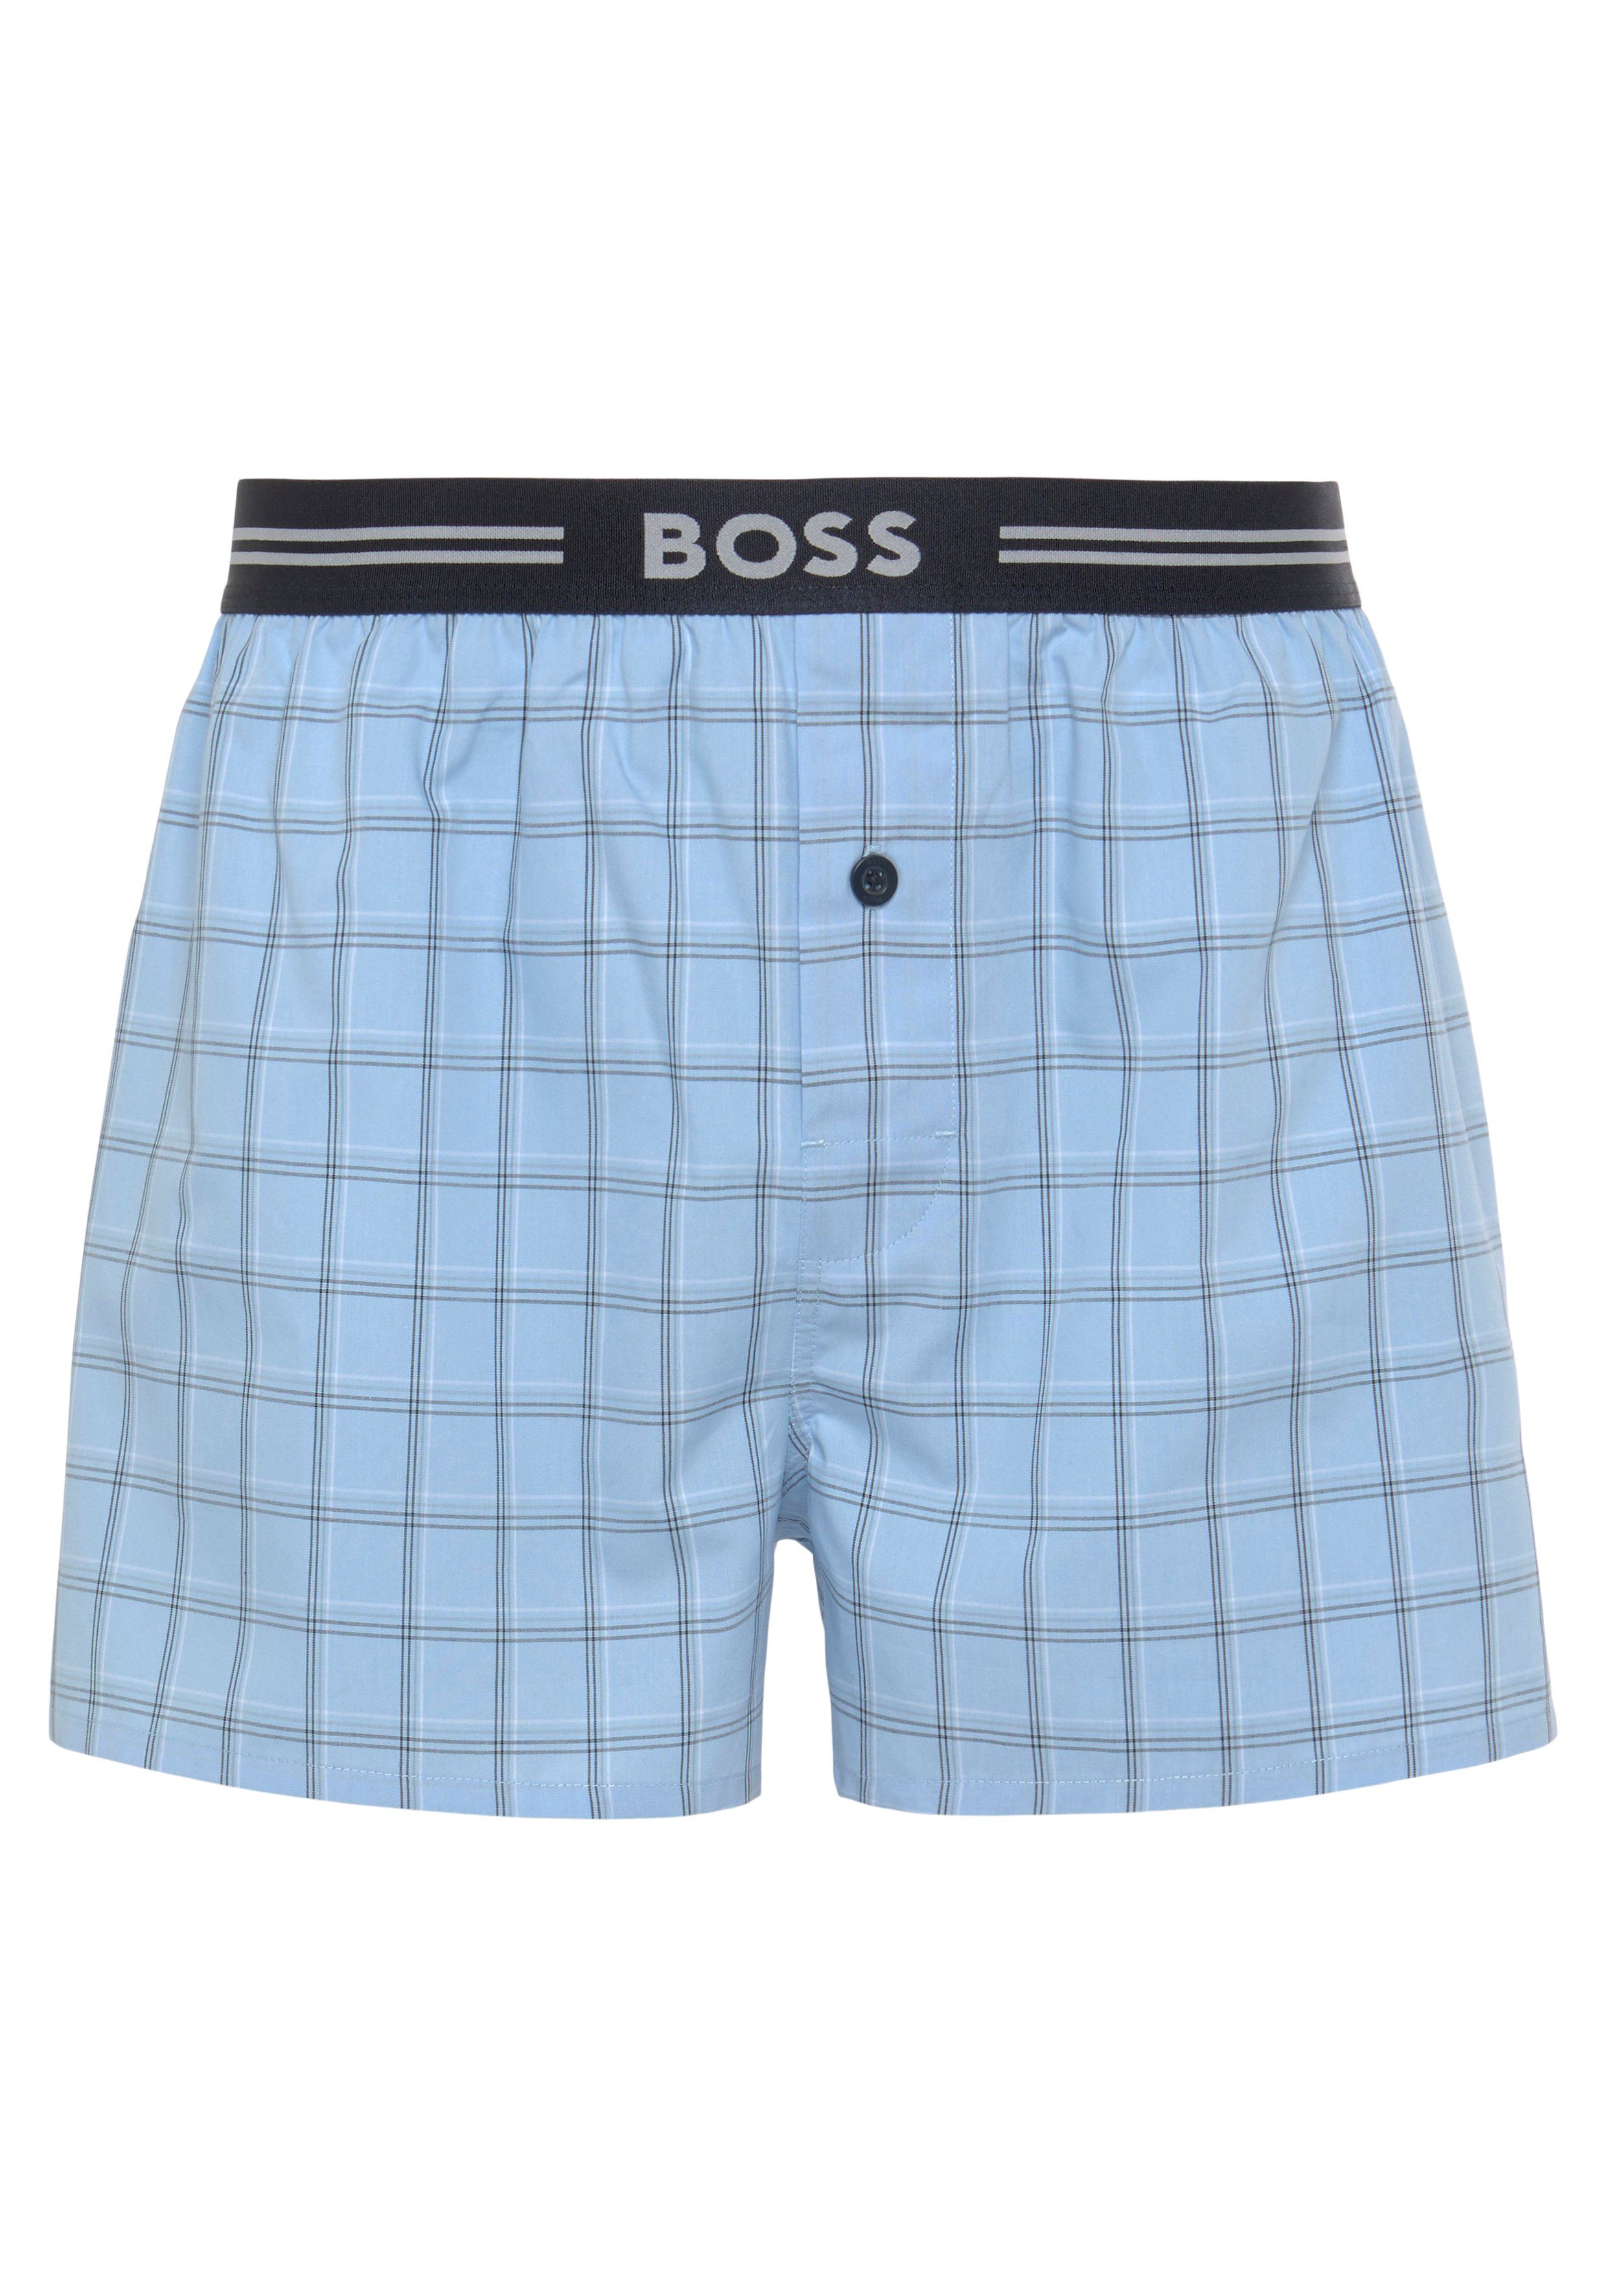 3er Woven mit Pack) Open-Blue Knopf 3P Boxer Boxershorts BOSS 3-St., Eingriff mit (Packung,